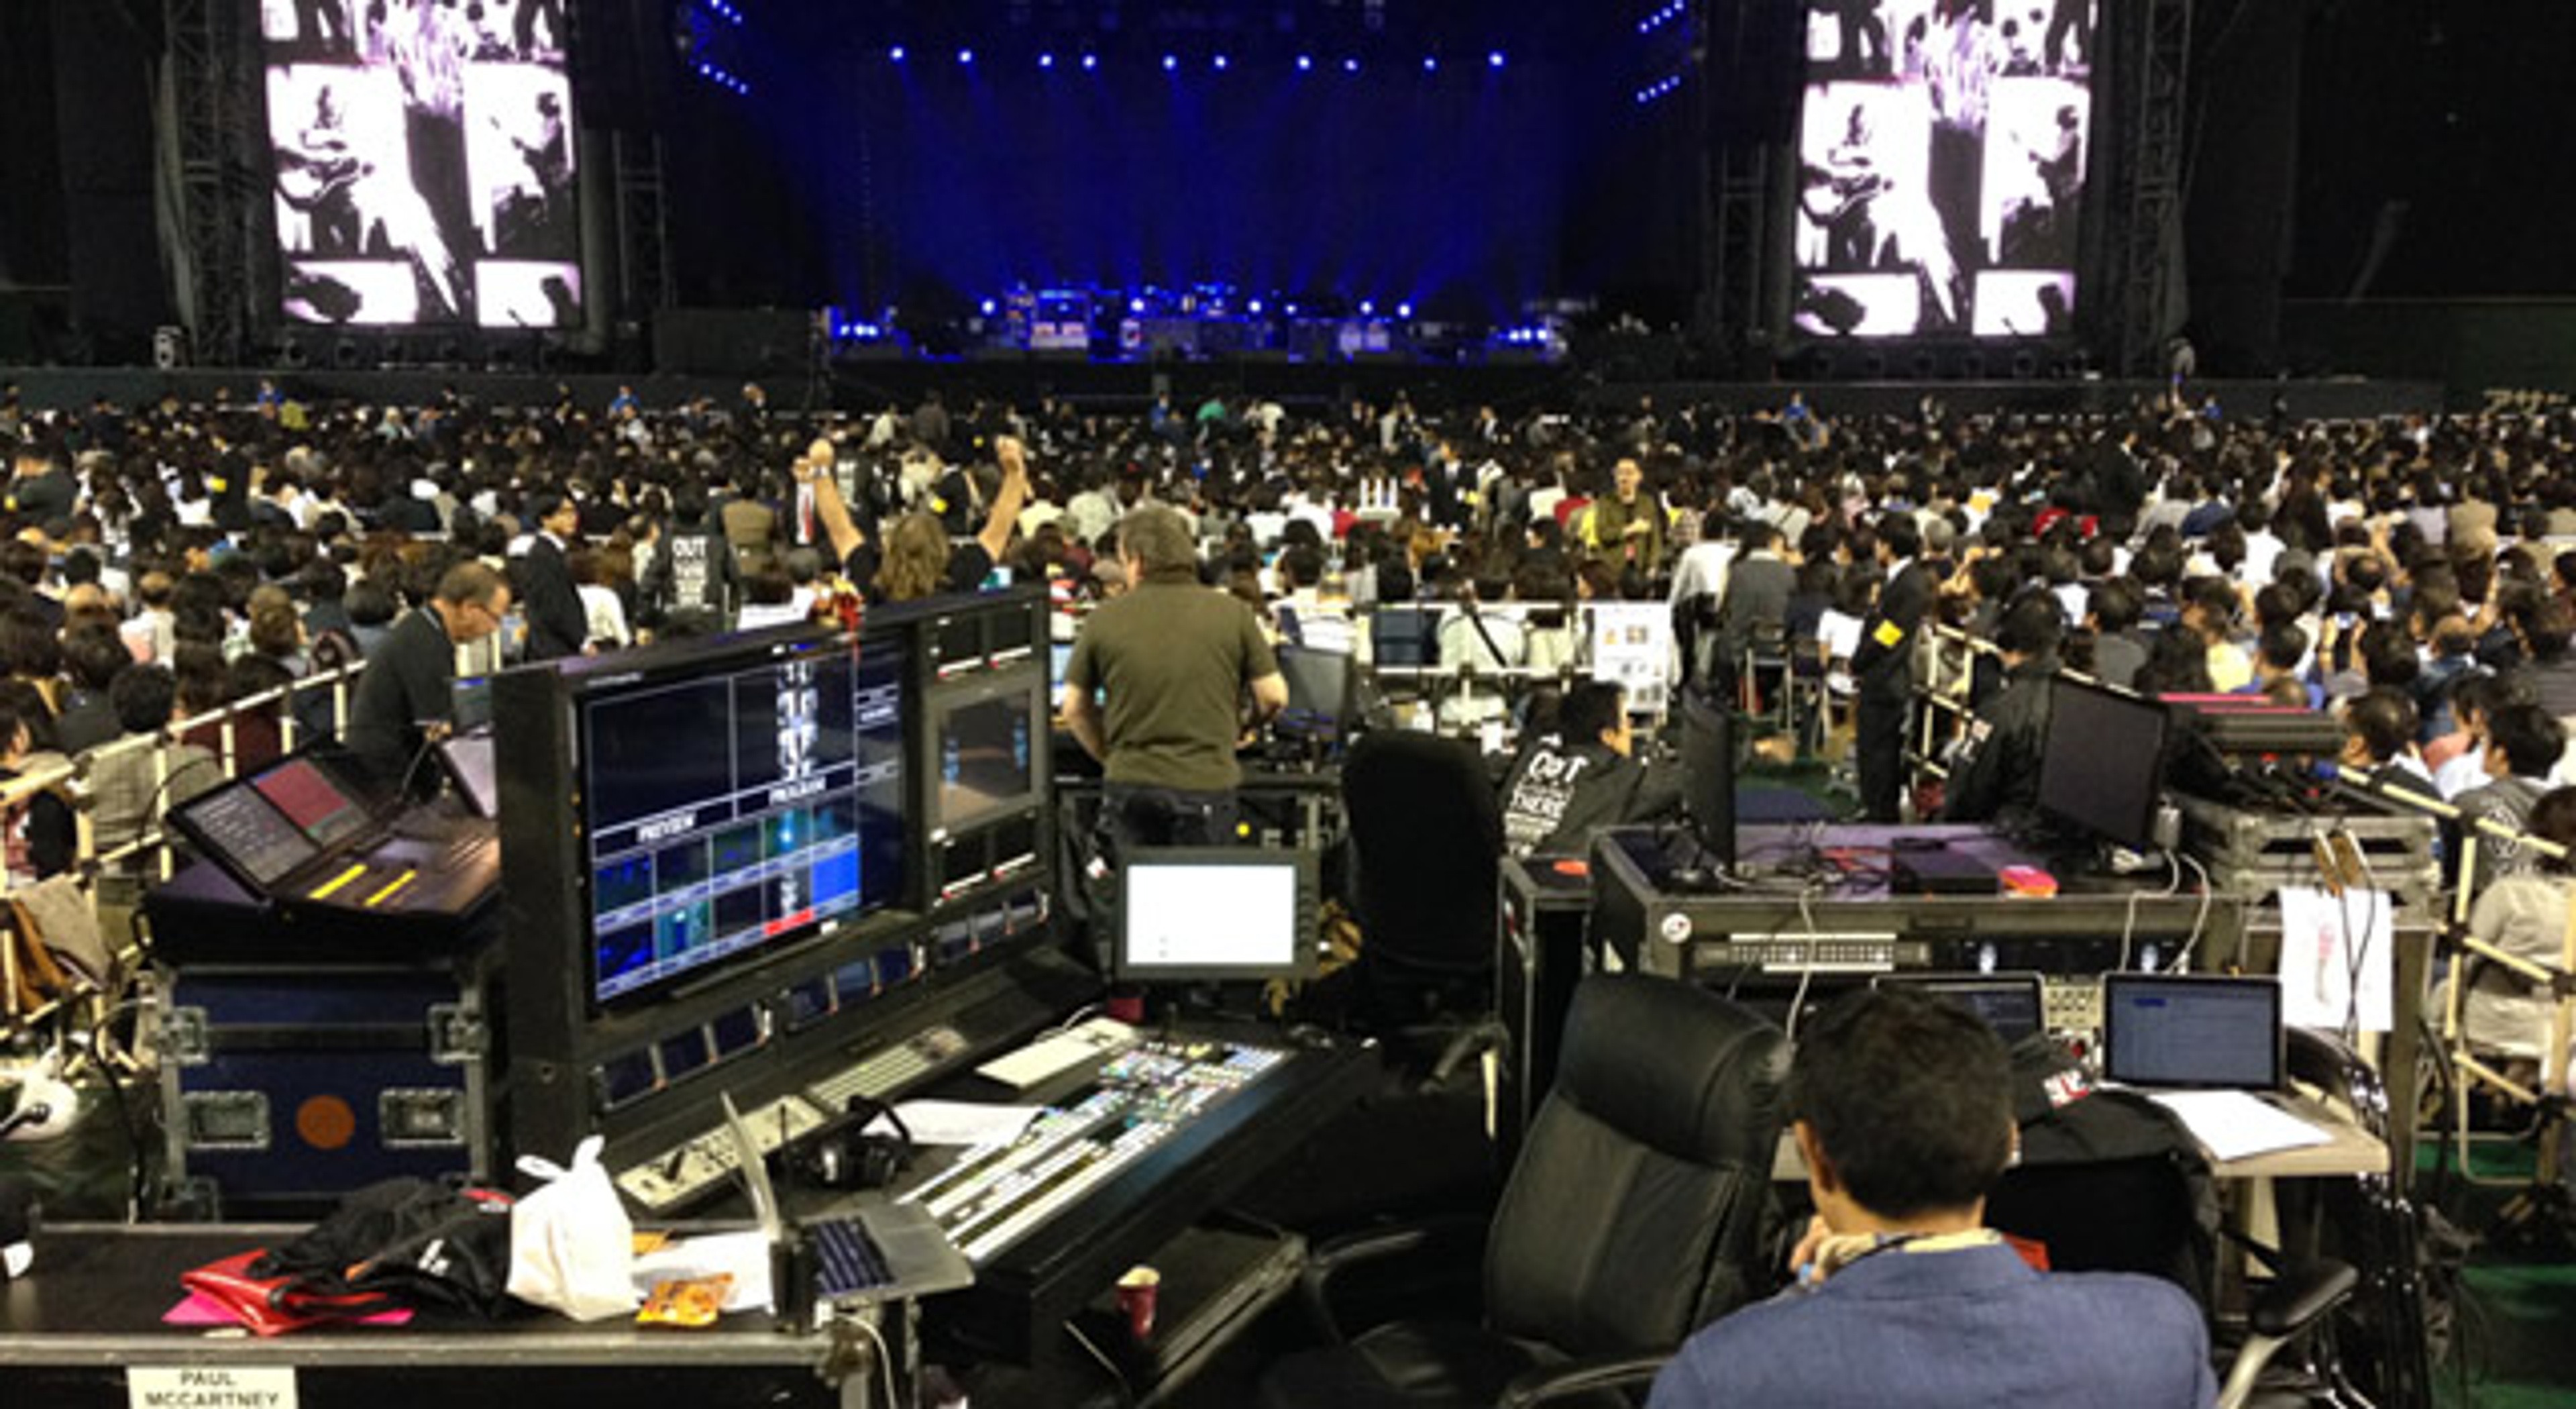 PaulMcCartney.com gets #OutThere in Japan